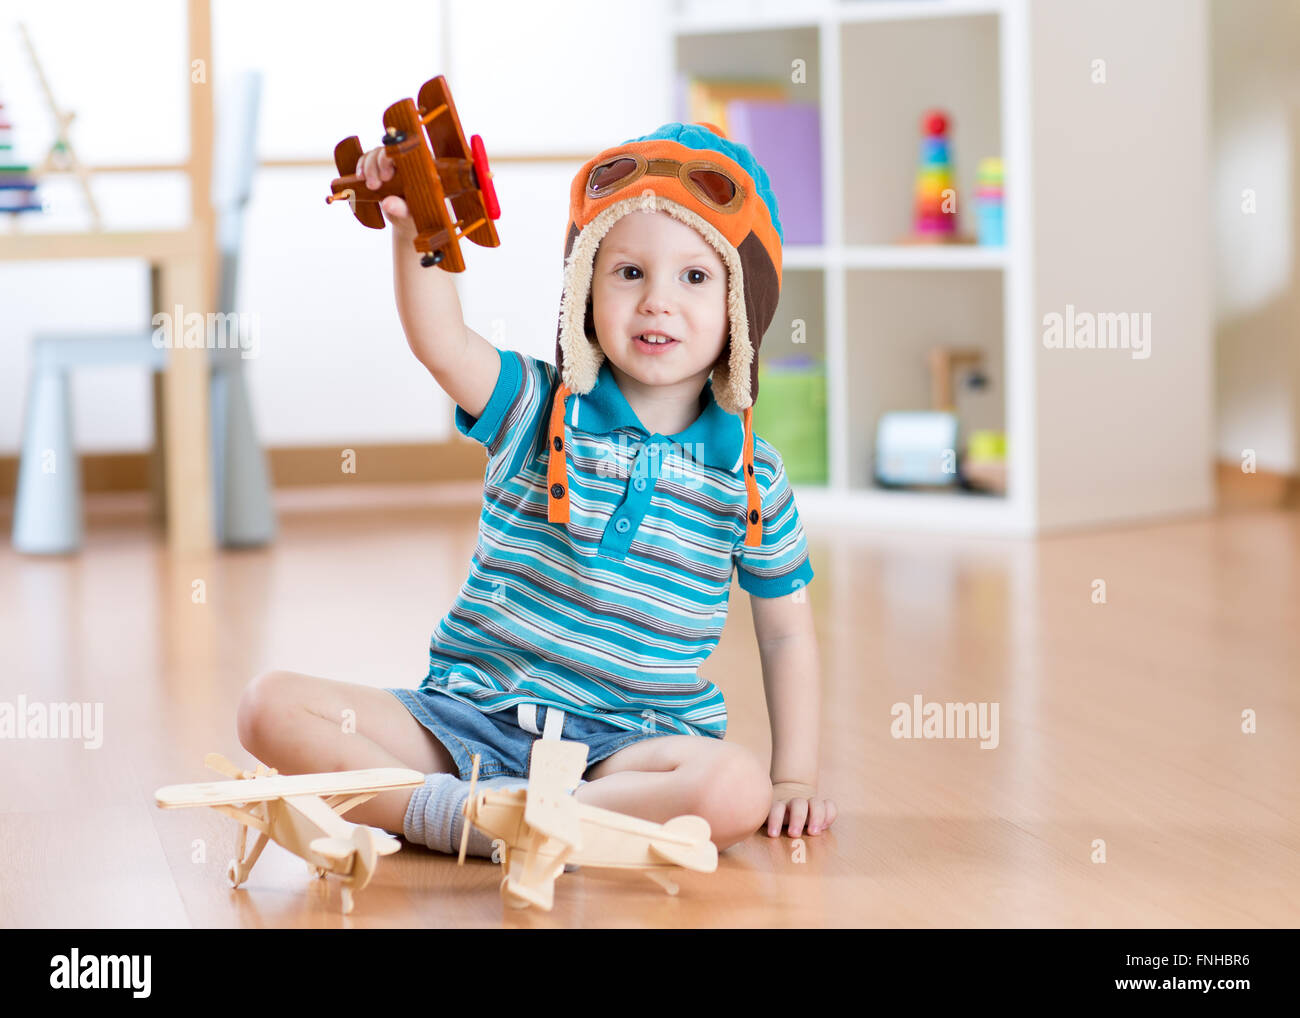 Happy child playing with toy airplane at home Stock Photo